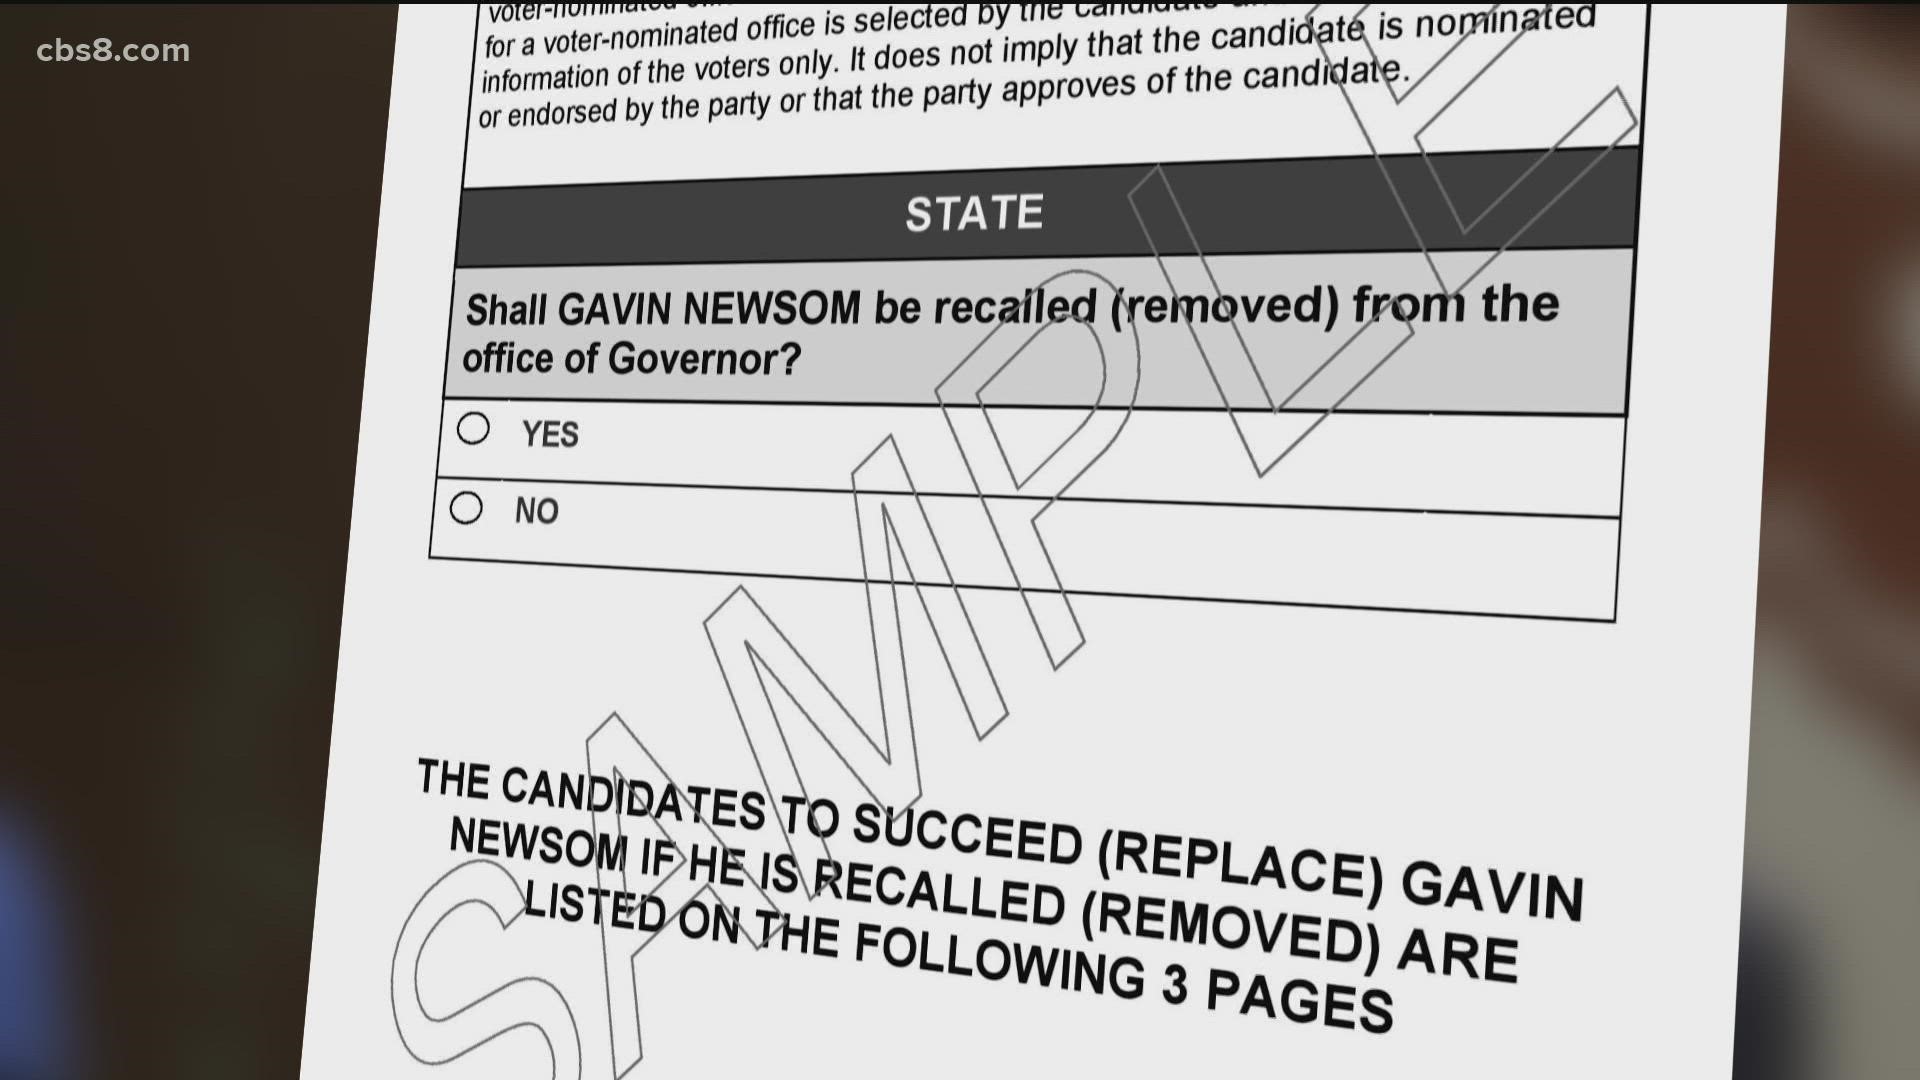 Voters can vote for both questions which ask if Newsom should be removed from office and if he is recalled, who should replace him.